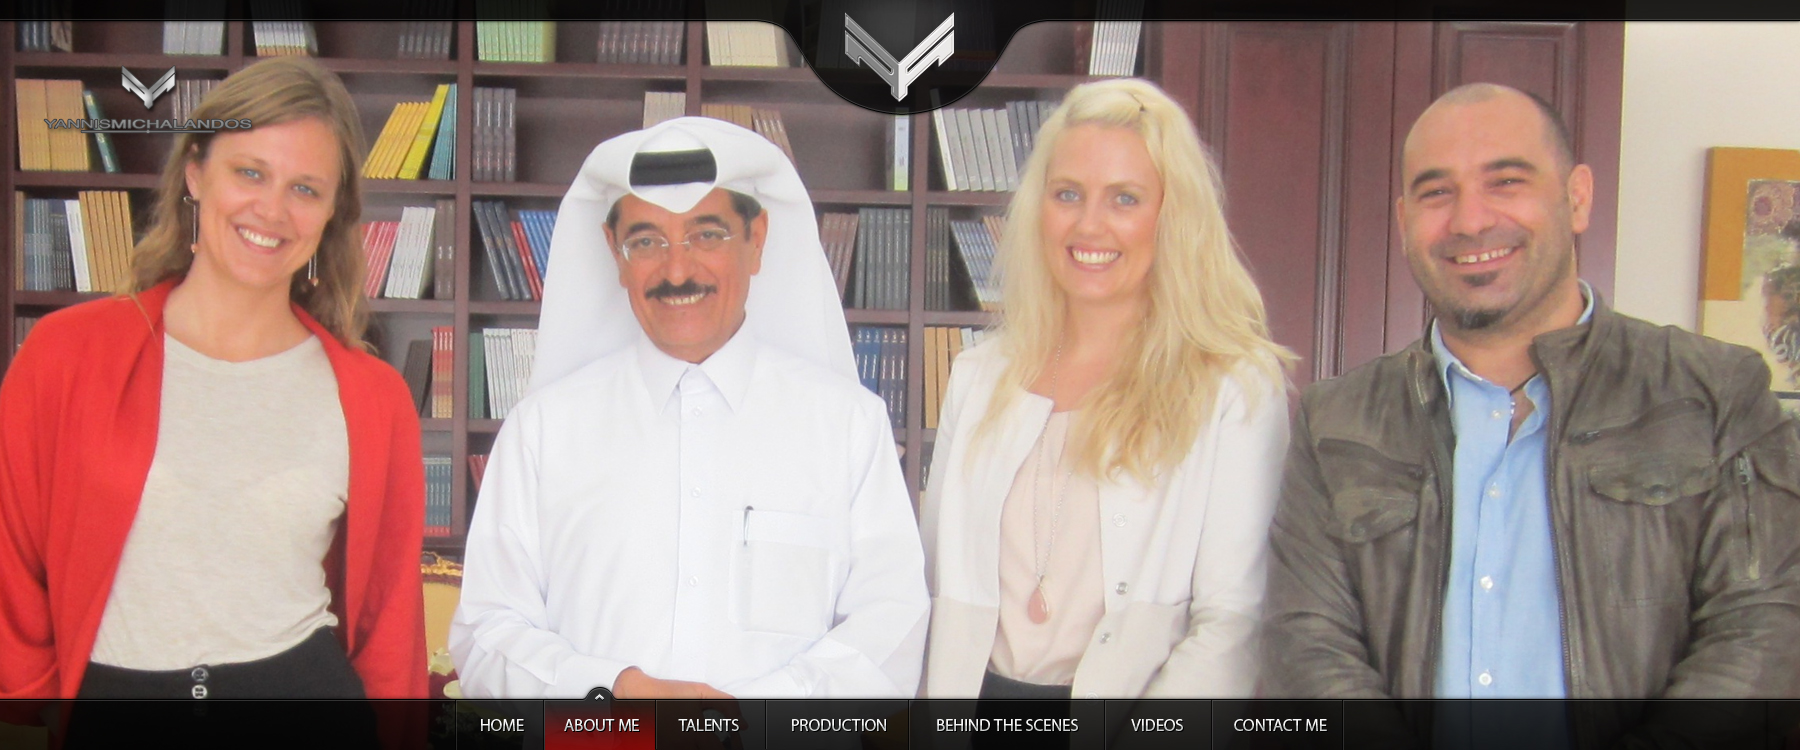 With Qatar's Minister of Culture & Arts